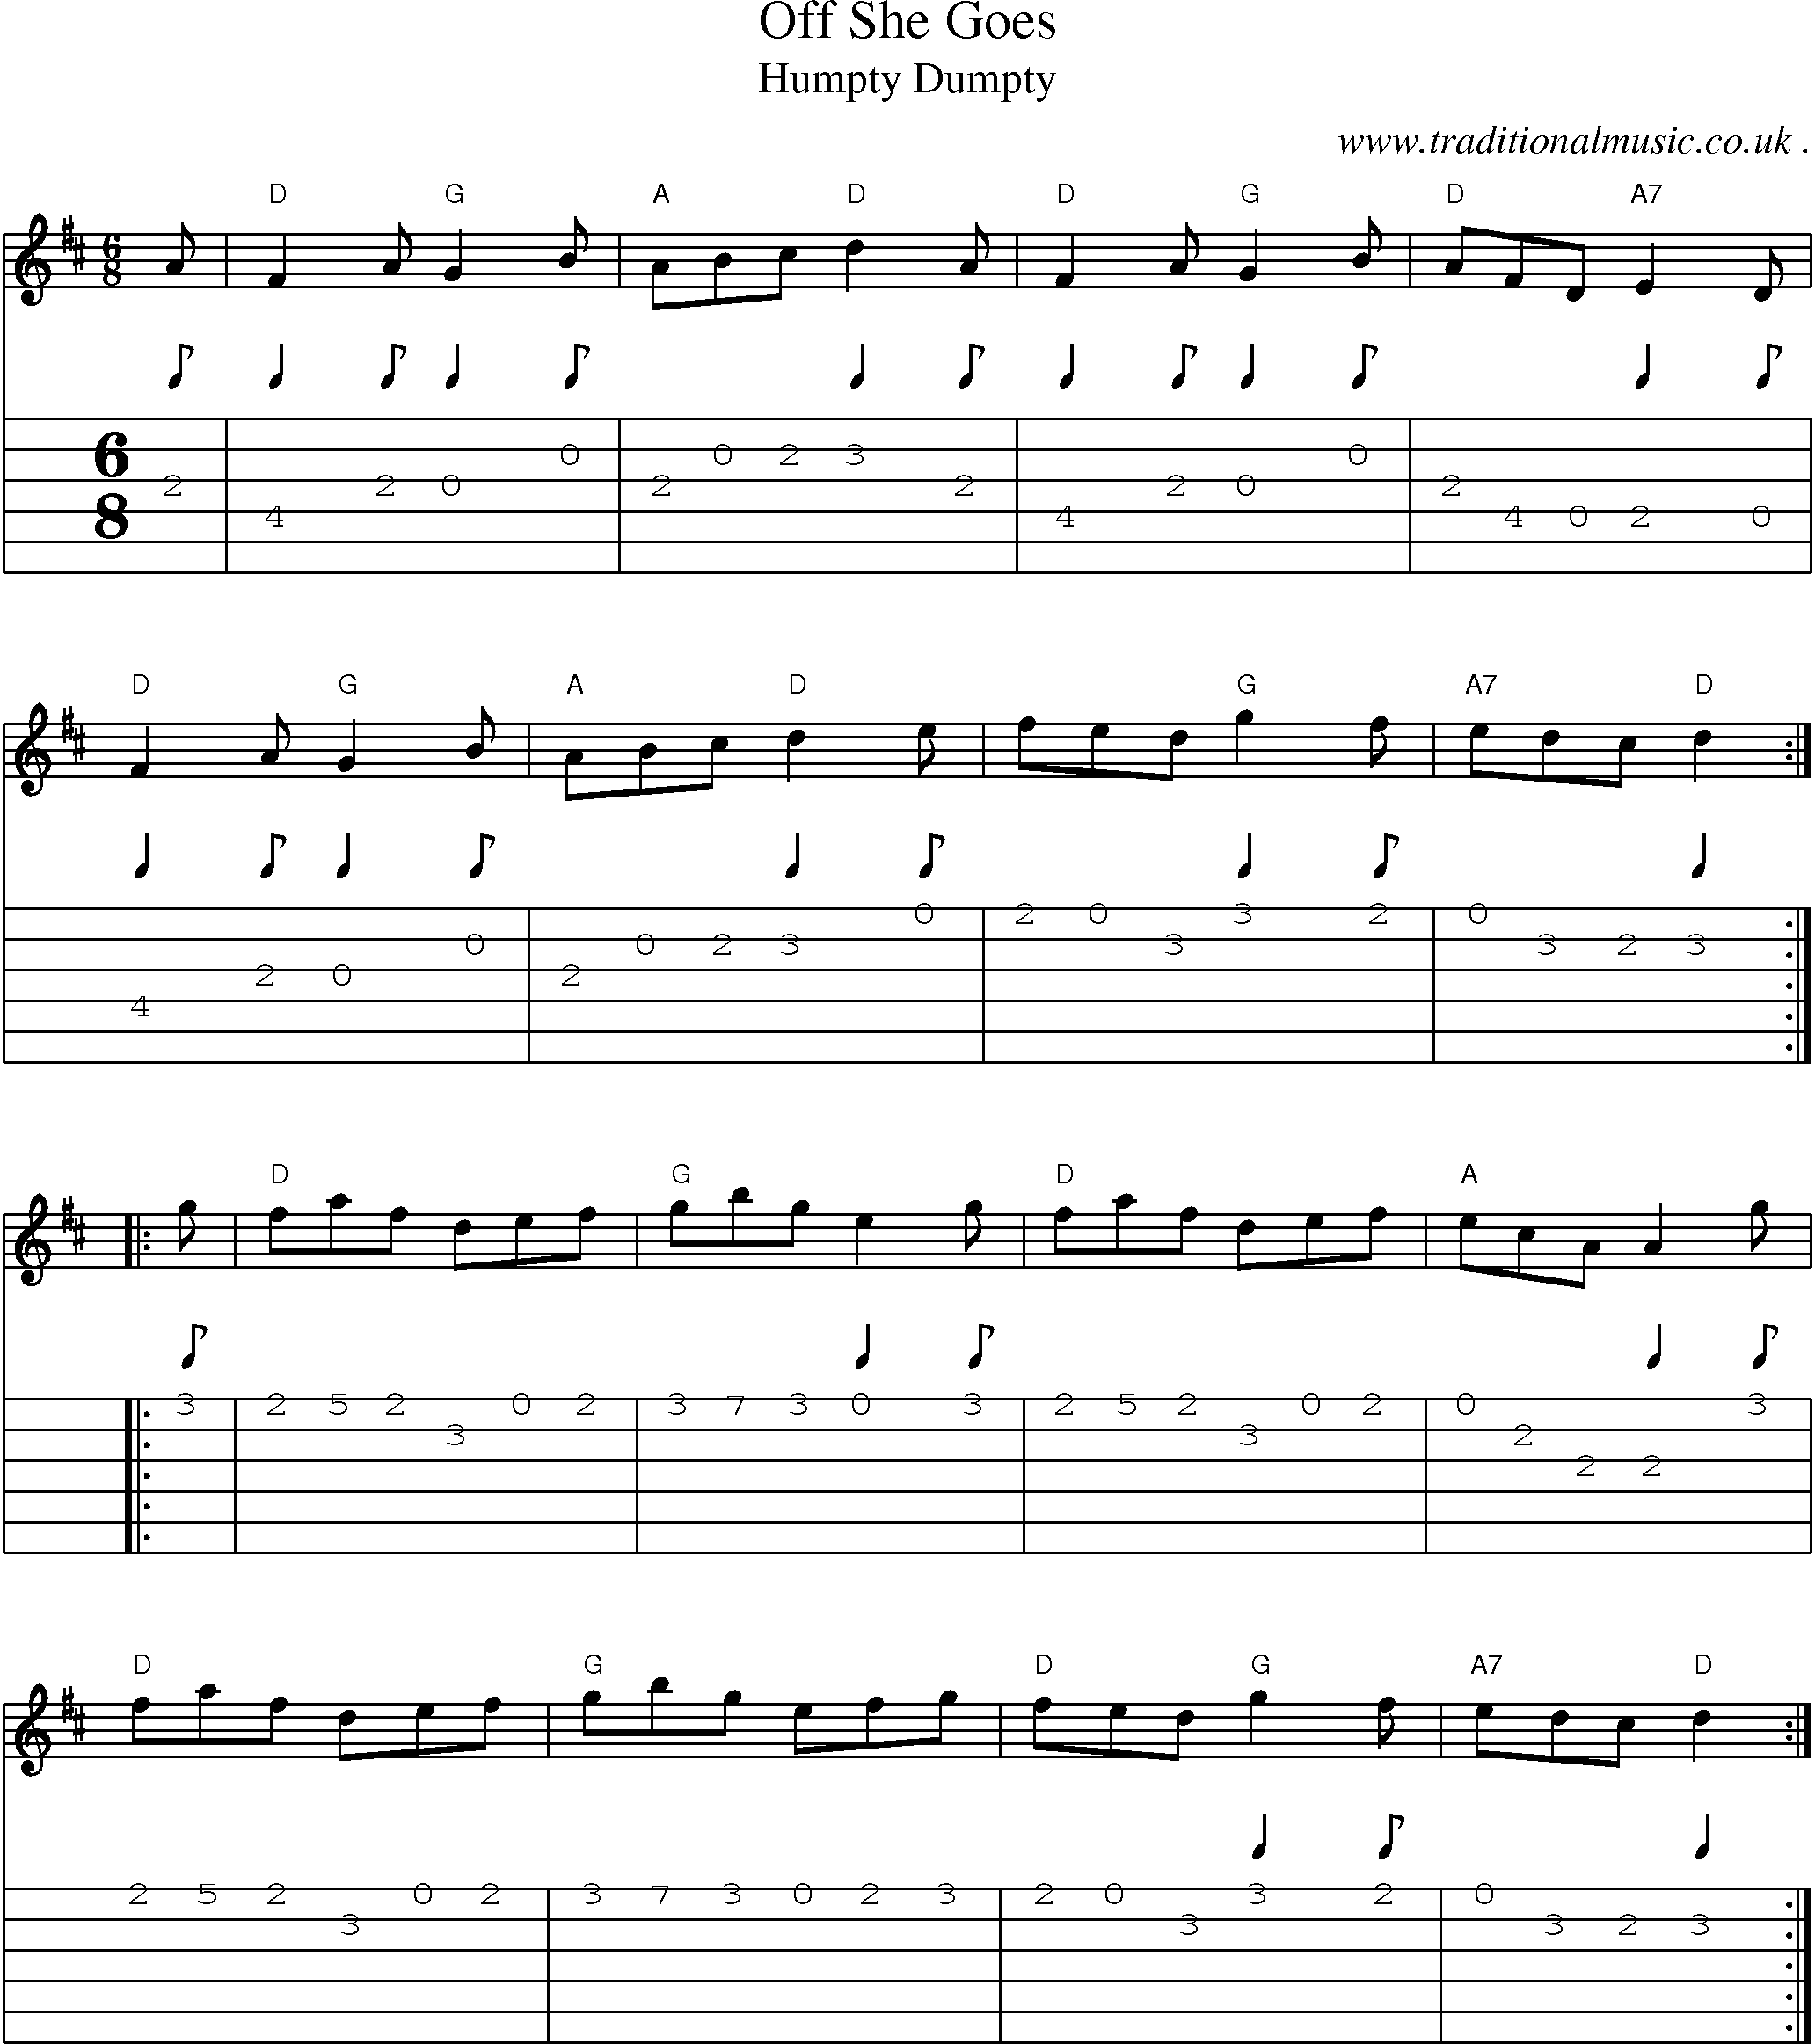 Music Score and Guitar Tabs for Off She Goes